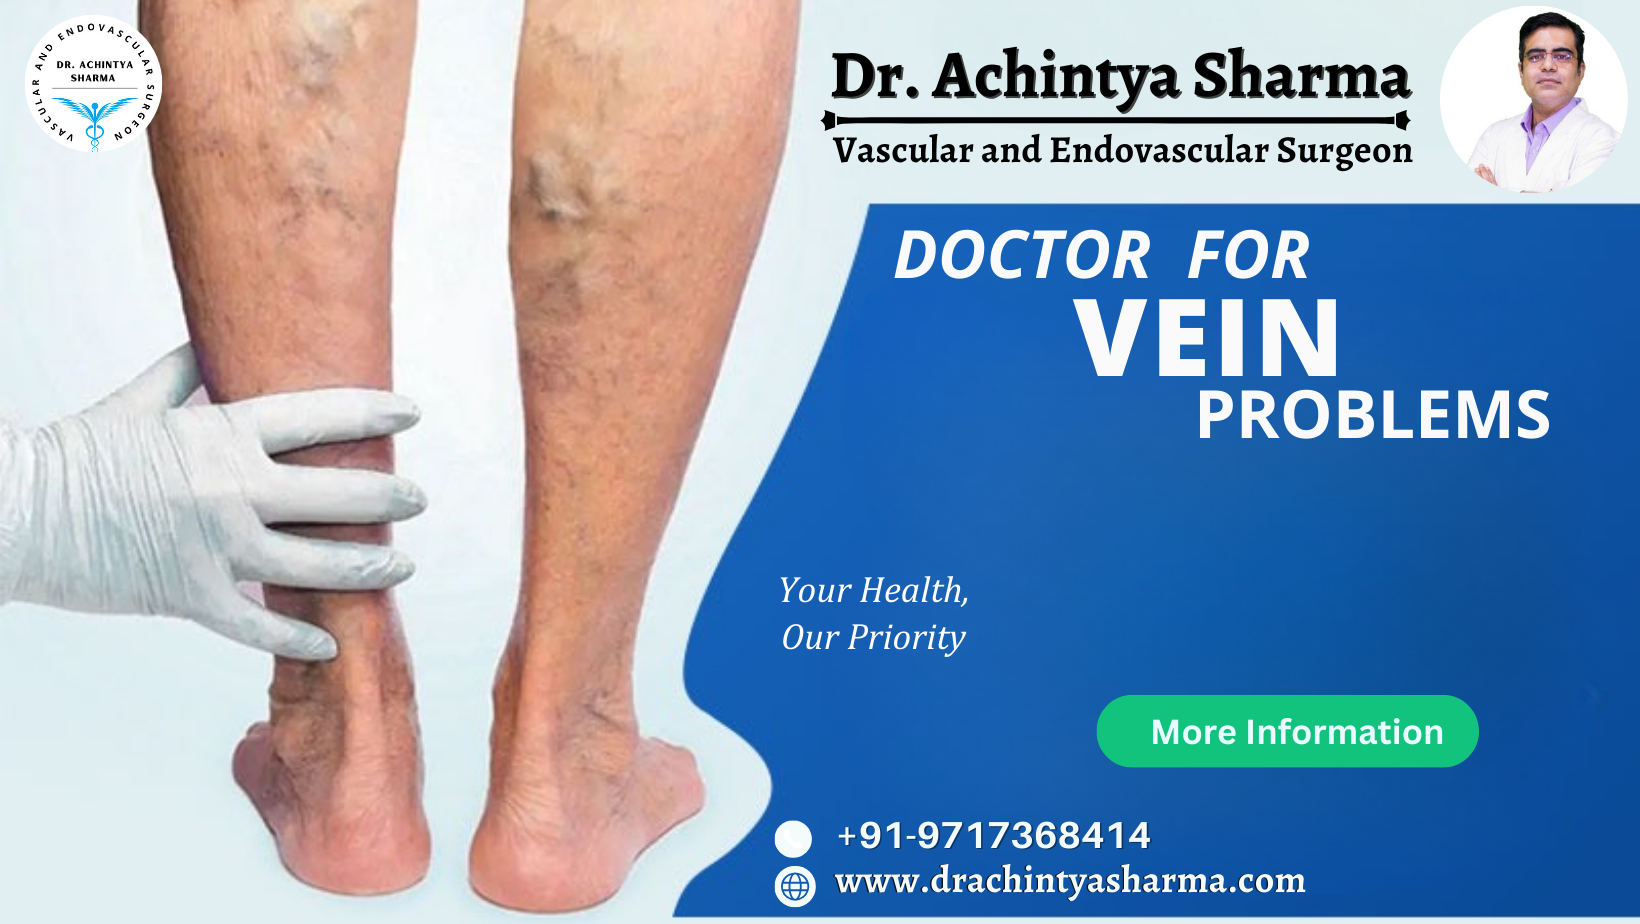 Expert Guide to Choosing the Right Doctor for Vein Problems